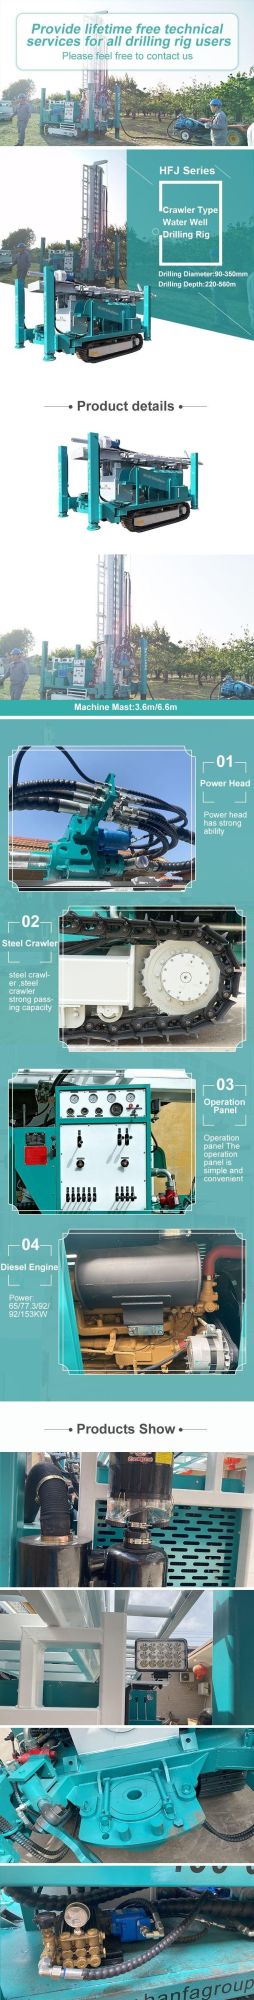 Hf Online Support, Field Maintenance Rig 400 Water Well Drilling Machine